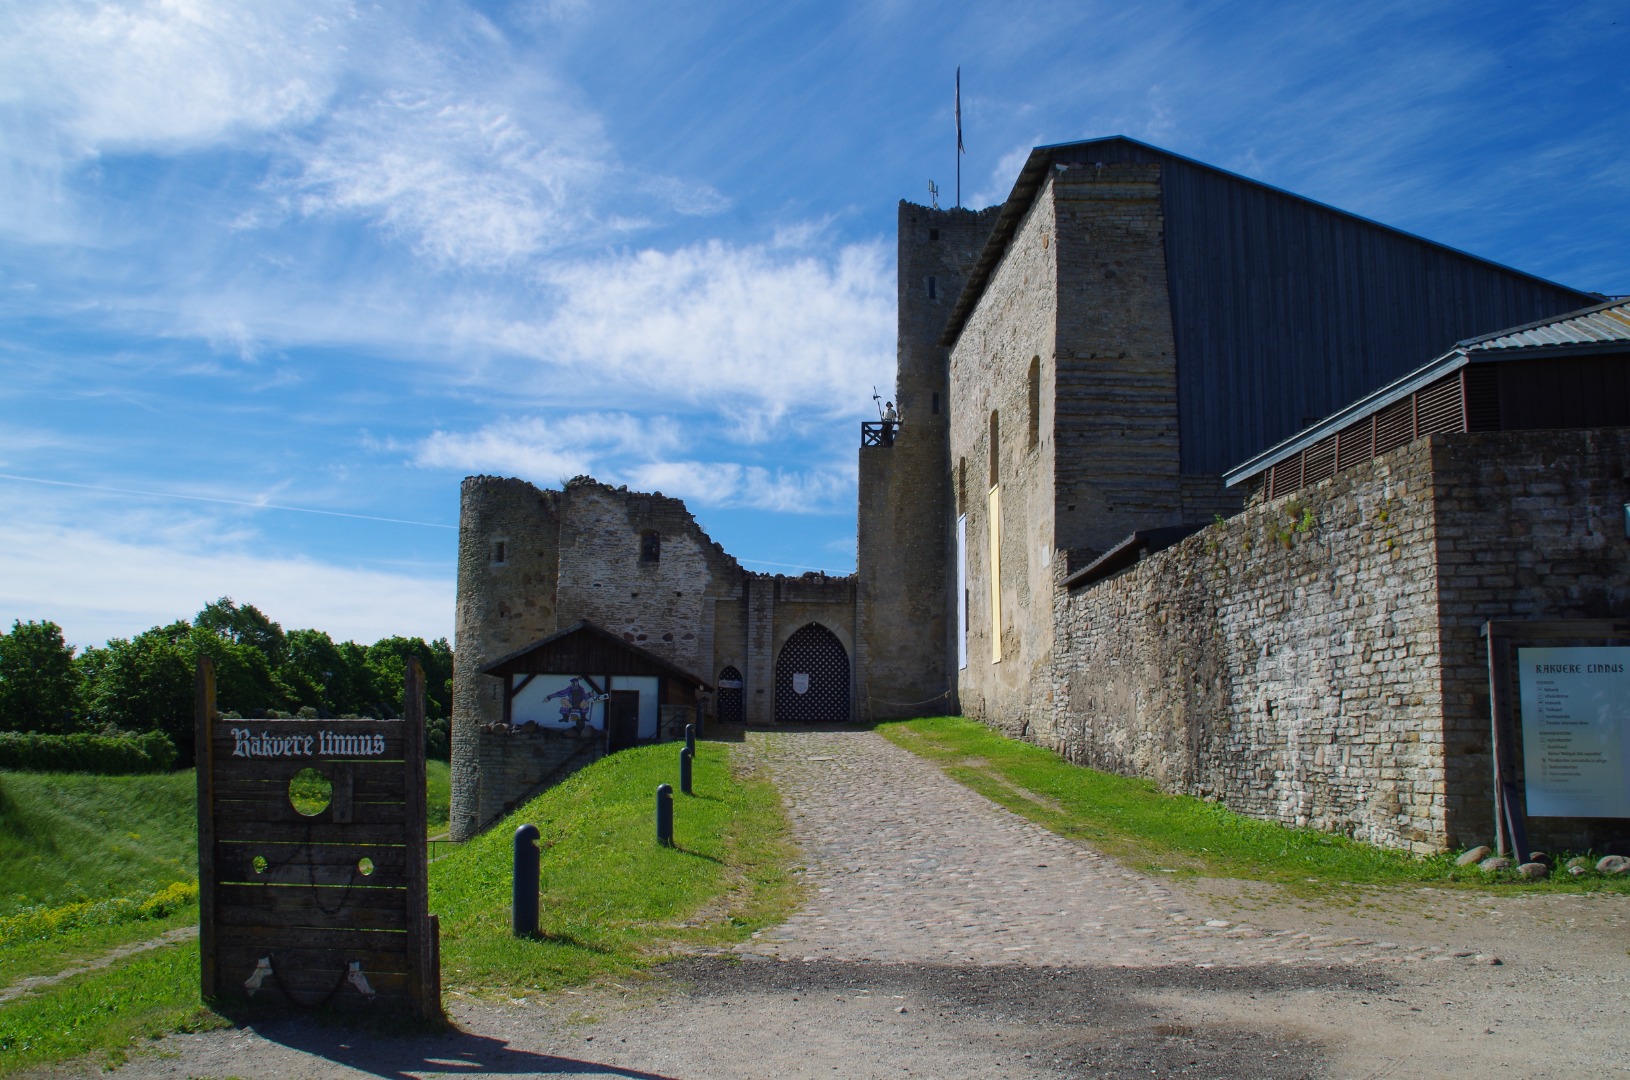 Rakvere Orthodox 3 - the gates of the city, the rondeel or the round artillery tower and the south-east tower. rephoto